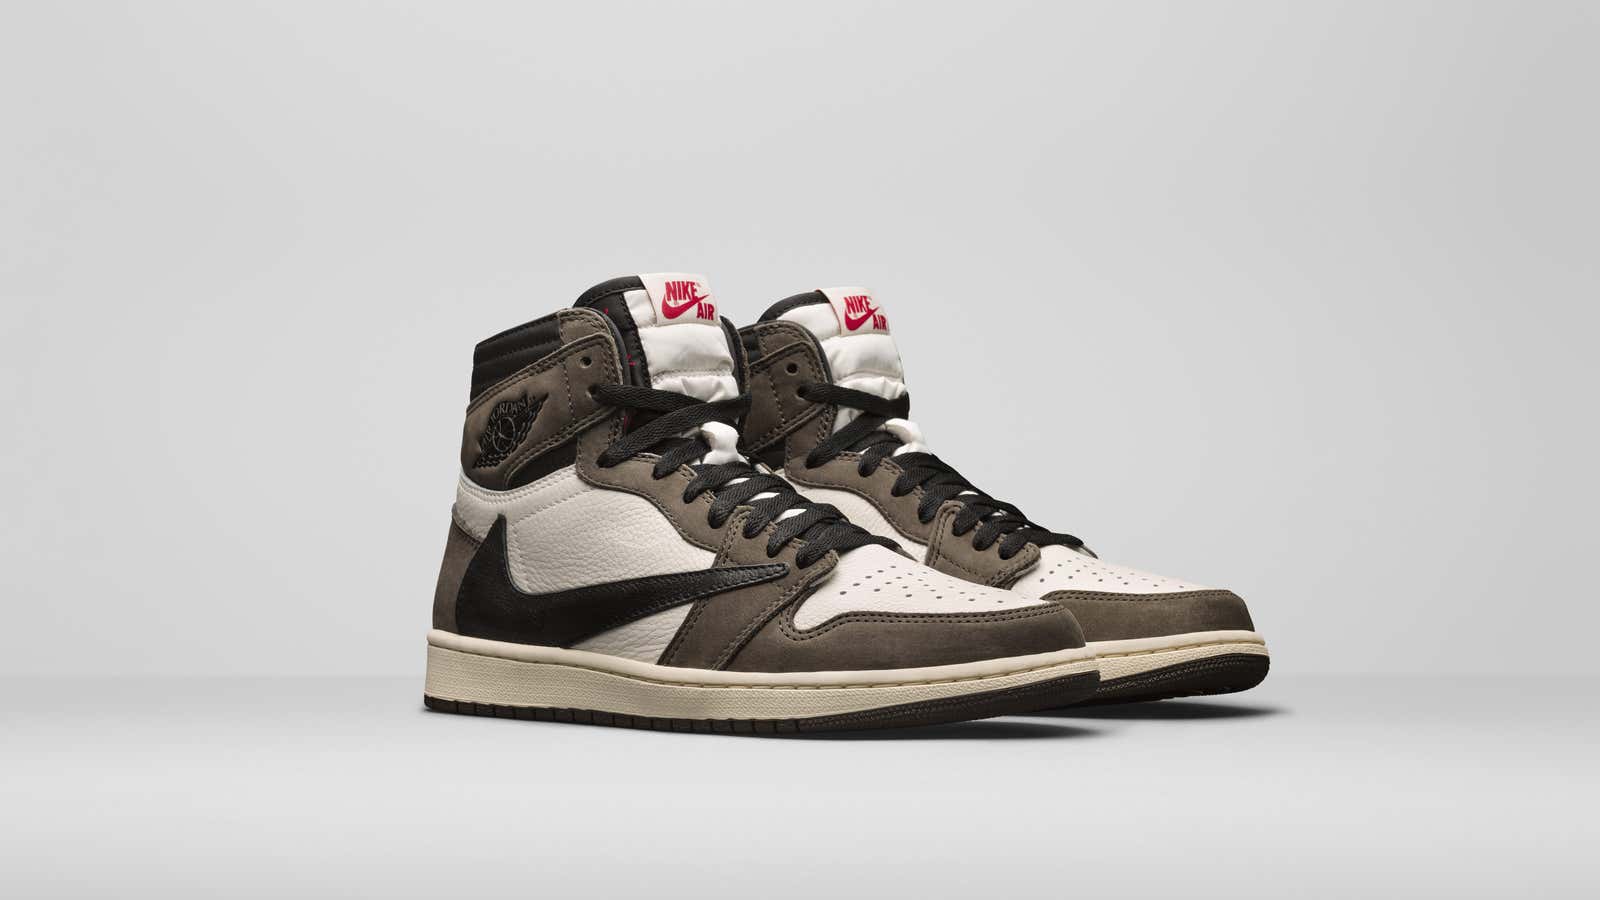 The Travis Scott Jordan 1s is the sort of shoe made for the resale market.